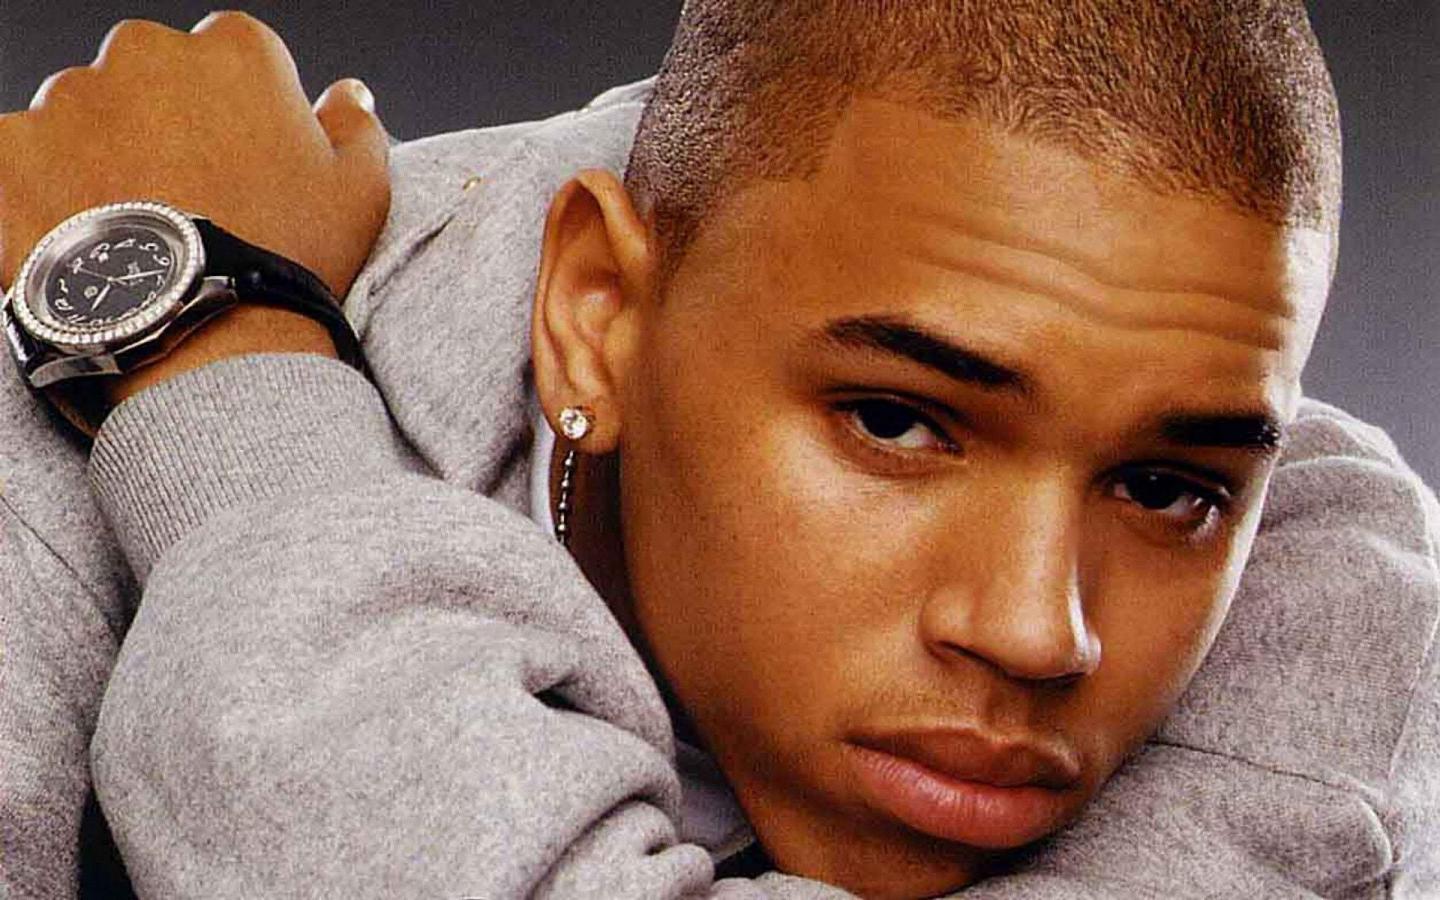 Chris Brown 1440x900 Wallpapers, 1440x900 Wallpapers & Pictures